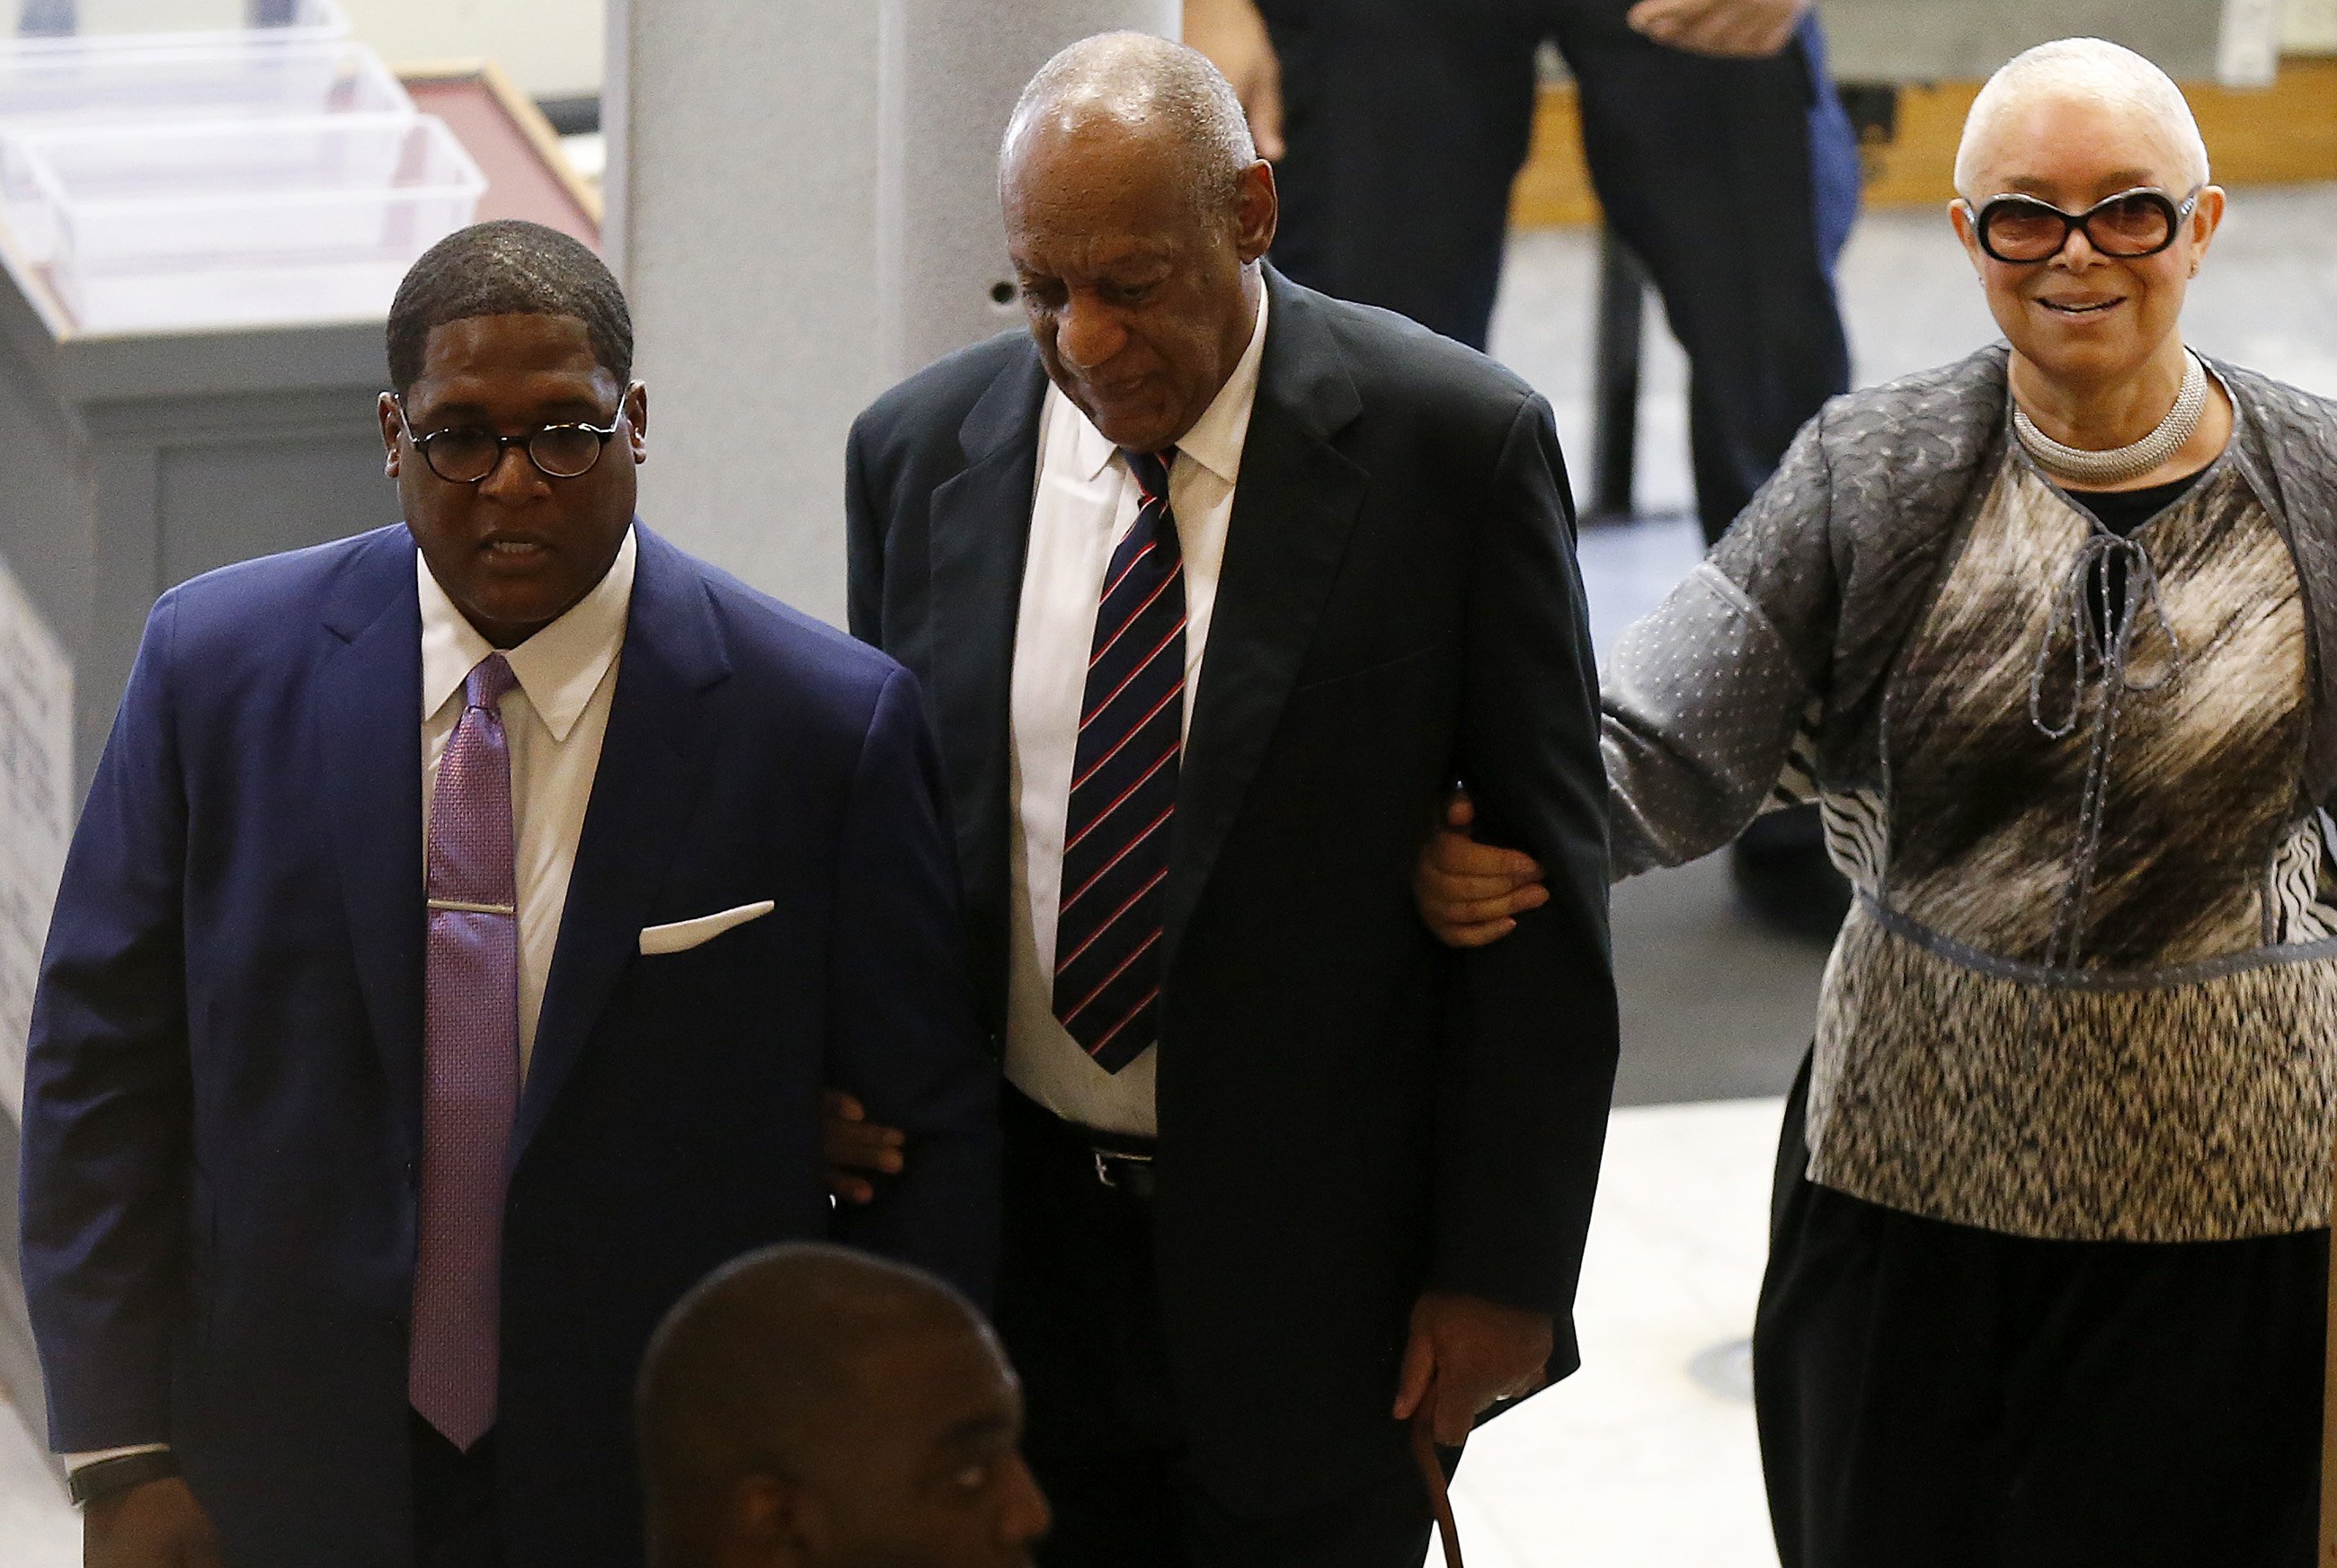 Bill and Camille Cosby and aide Andrew Wyatt enter the Montgomery County Courthouse on June 12, 2017 in in Norristown, Pennsylvania. | Photo: GettyImages